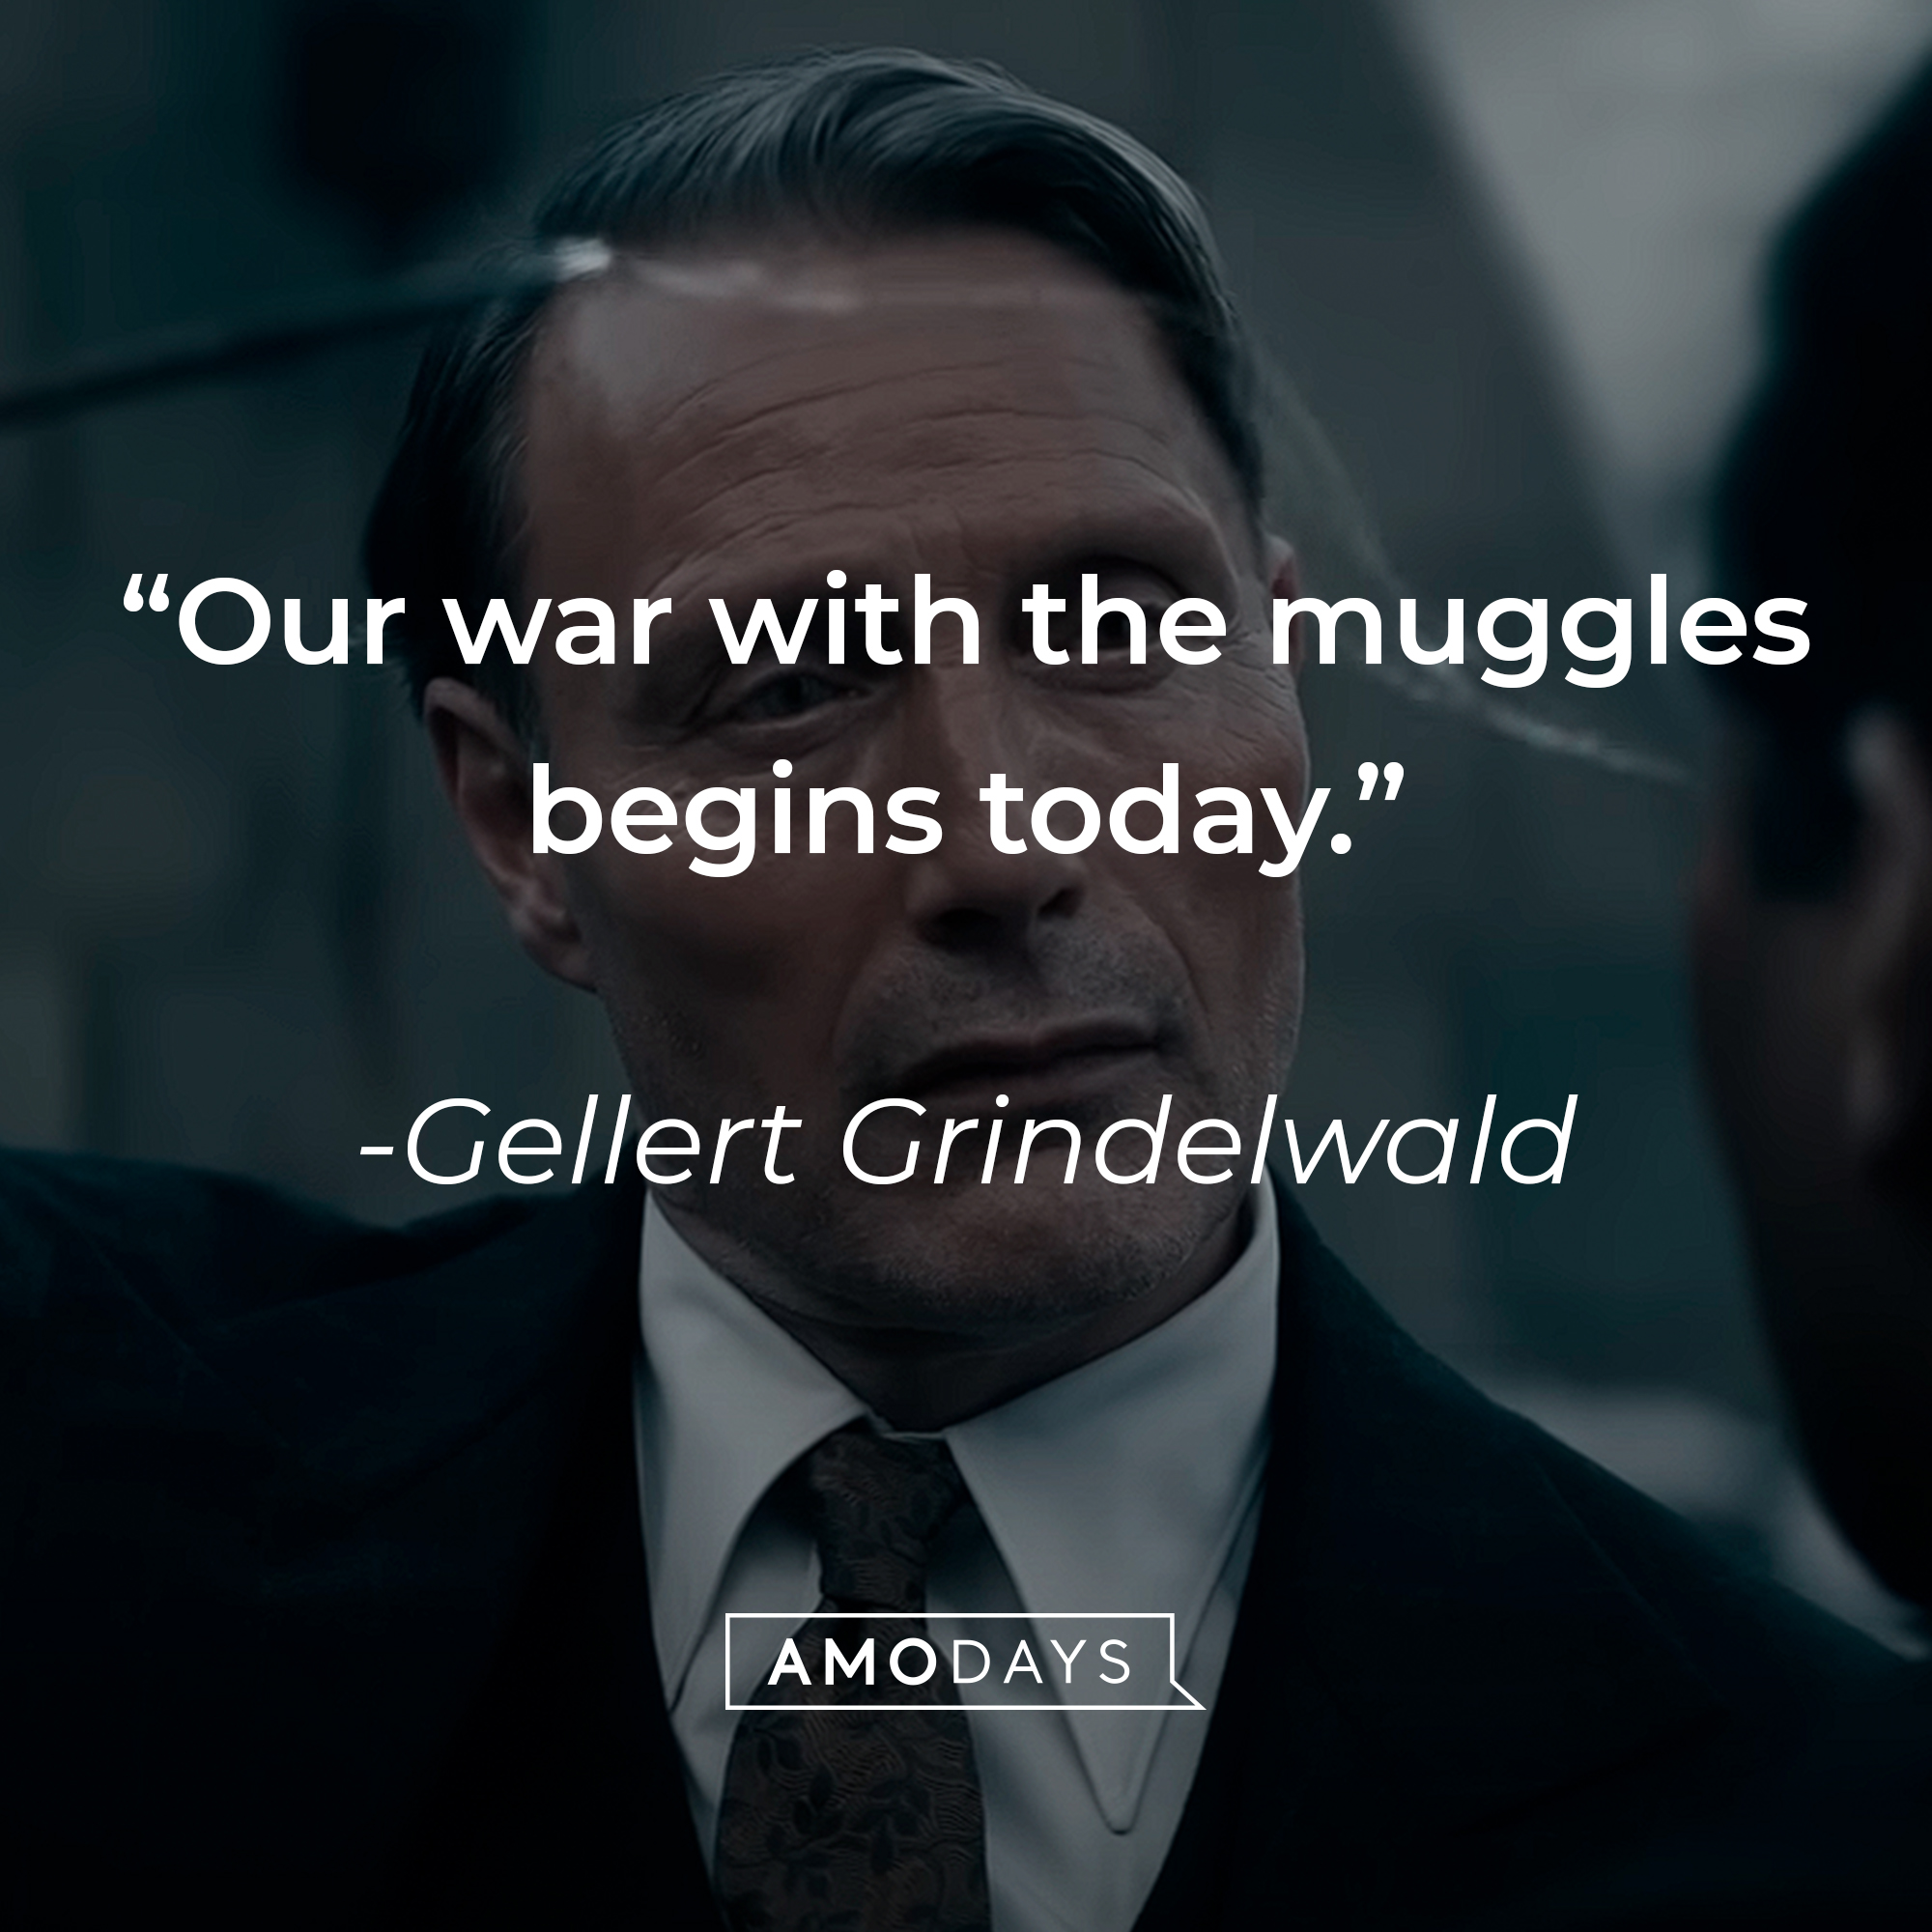 Gellert Grindelwald, with his quote: “Our war with the muggles begins today.” | Source: Youtube.com/WarnerBrosPictures